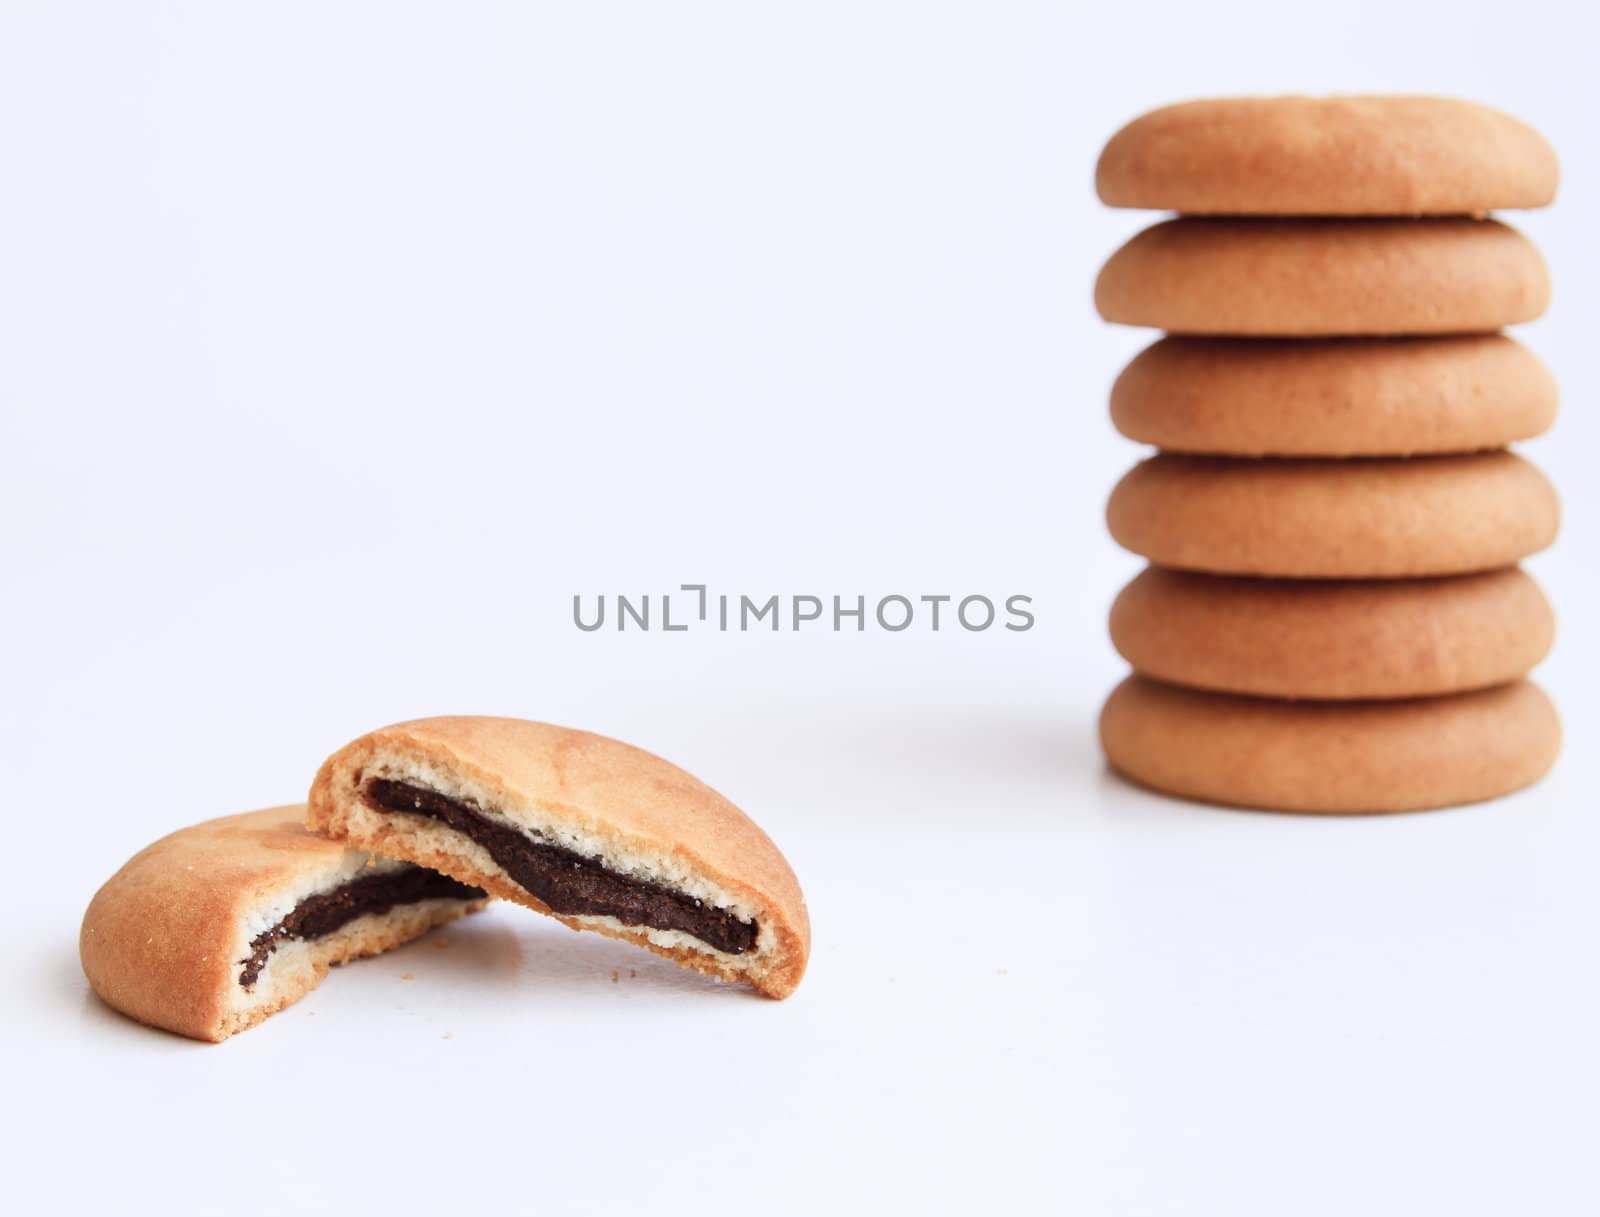 biscuits filled with chocolate cream by manaemedia